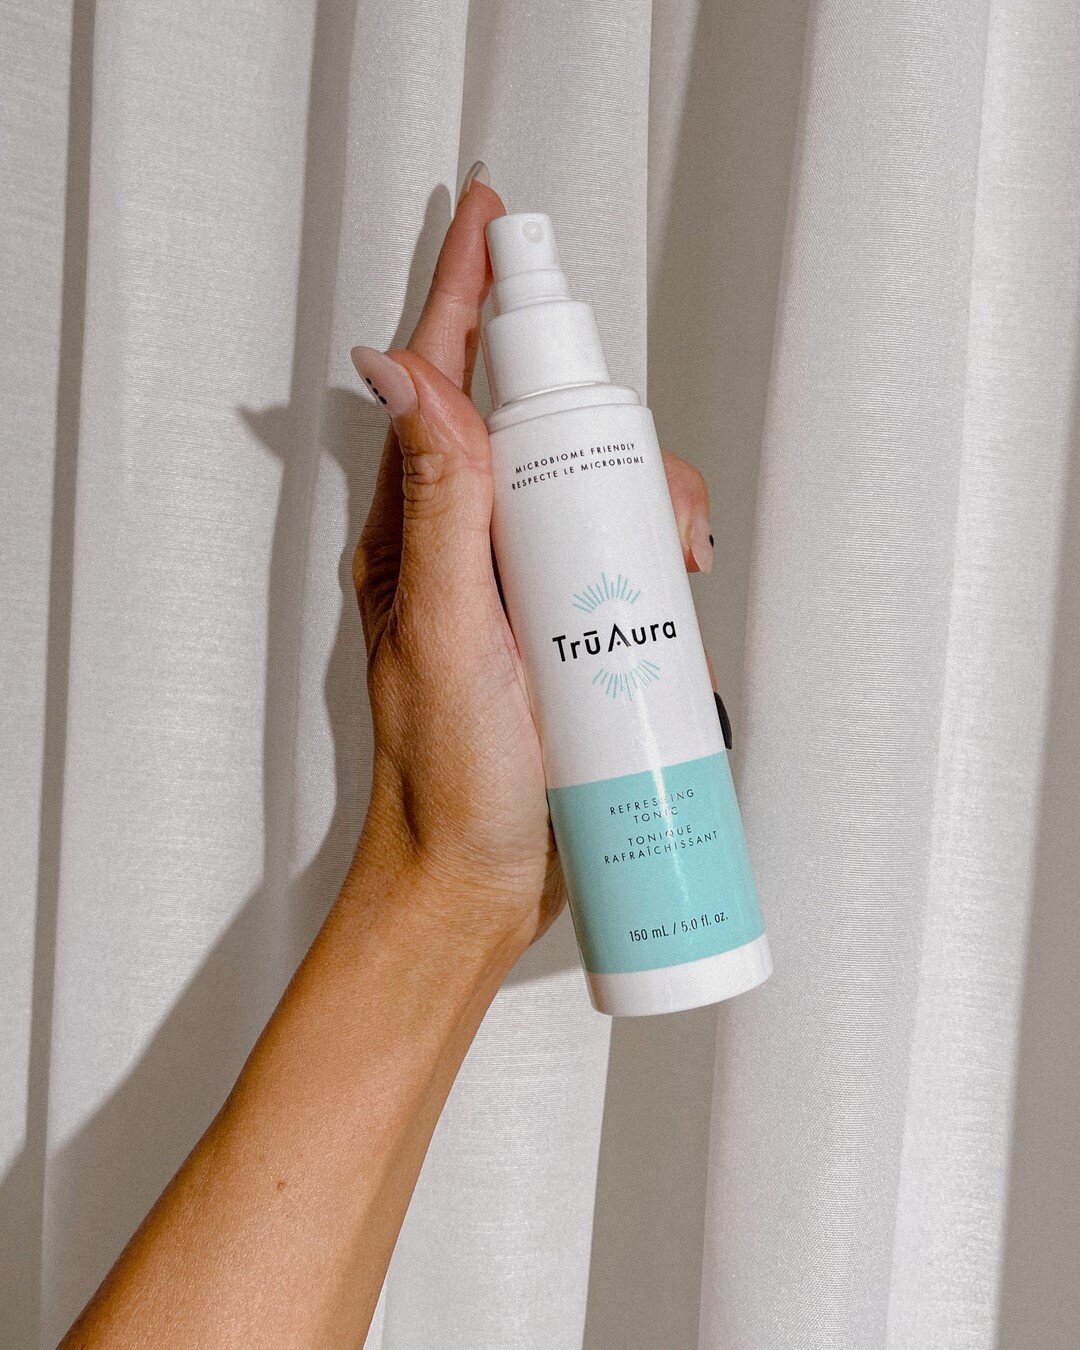 Don't worry about dehydration this summer -- we've got you with our Refreshing Tonic -- Shop now at Truaurabeauty.com ⠀⠀⠀⠀⠀⠀⠀⠀⠀
. ⠀⠀⠀⠀⠀⠀⠀⠀⠀
. ⠀⠀⠀⠀⠀⠀⠀⠀⠀
. ⠀⠀⠀⠀⠀⠀⠀⠀⠀
#hydration #clearskin #youthfulskin #skincareessentials #truaurabeauty #skincareproduc